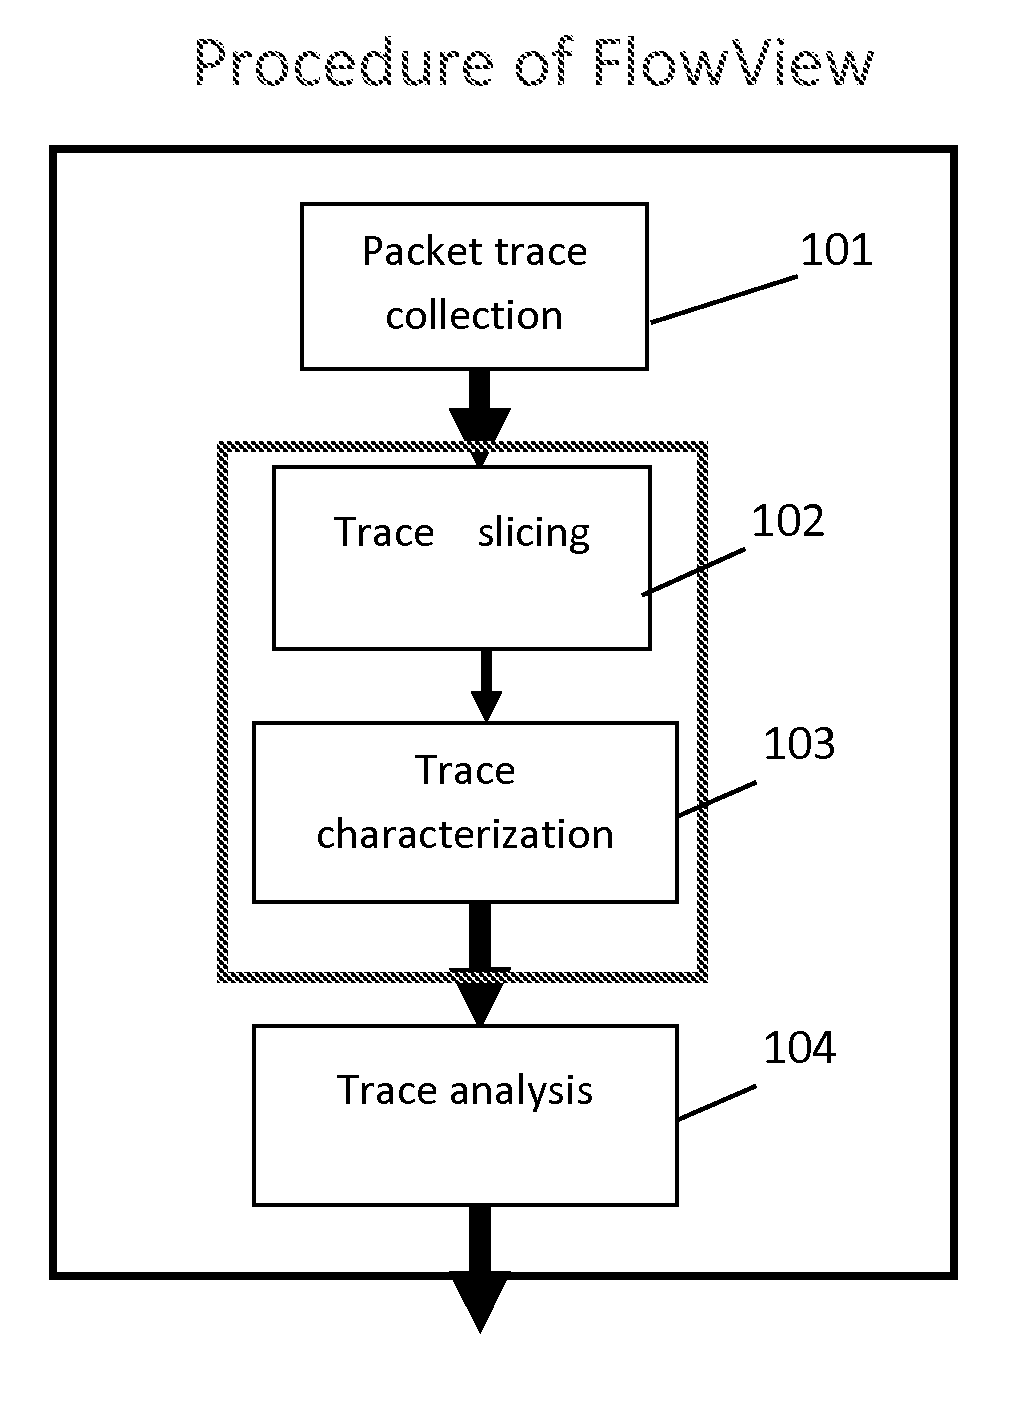 System and method for network packet event characterization and analysis